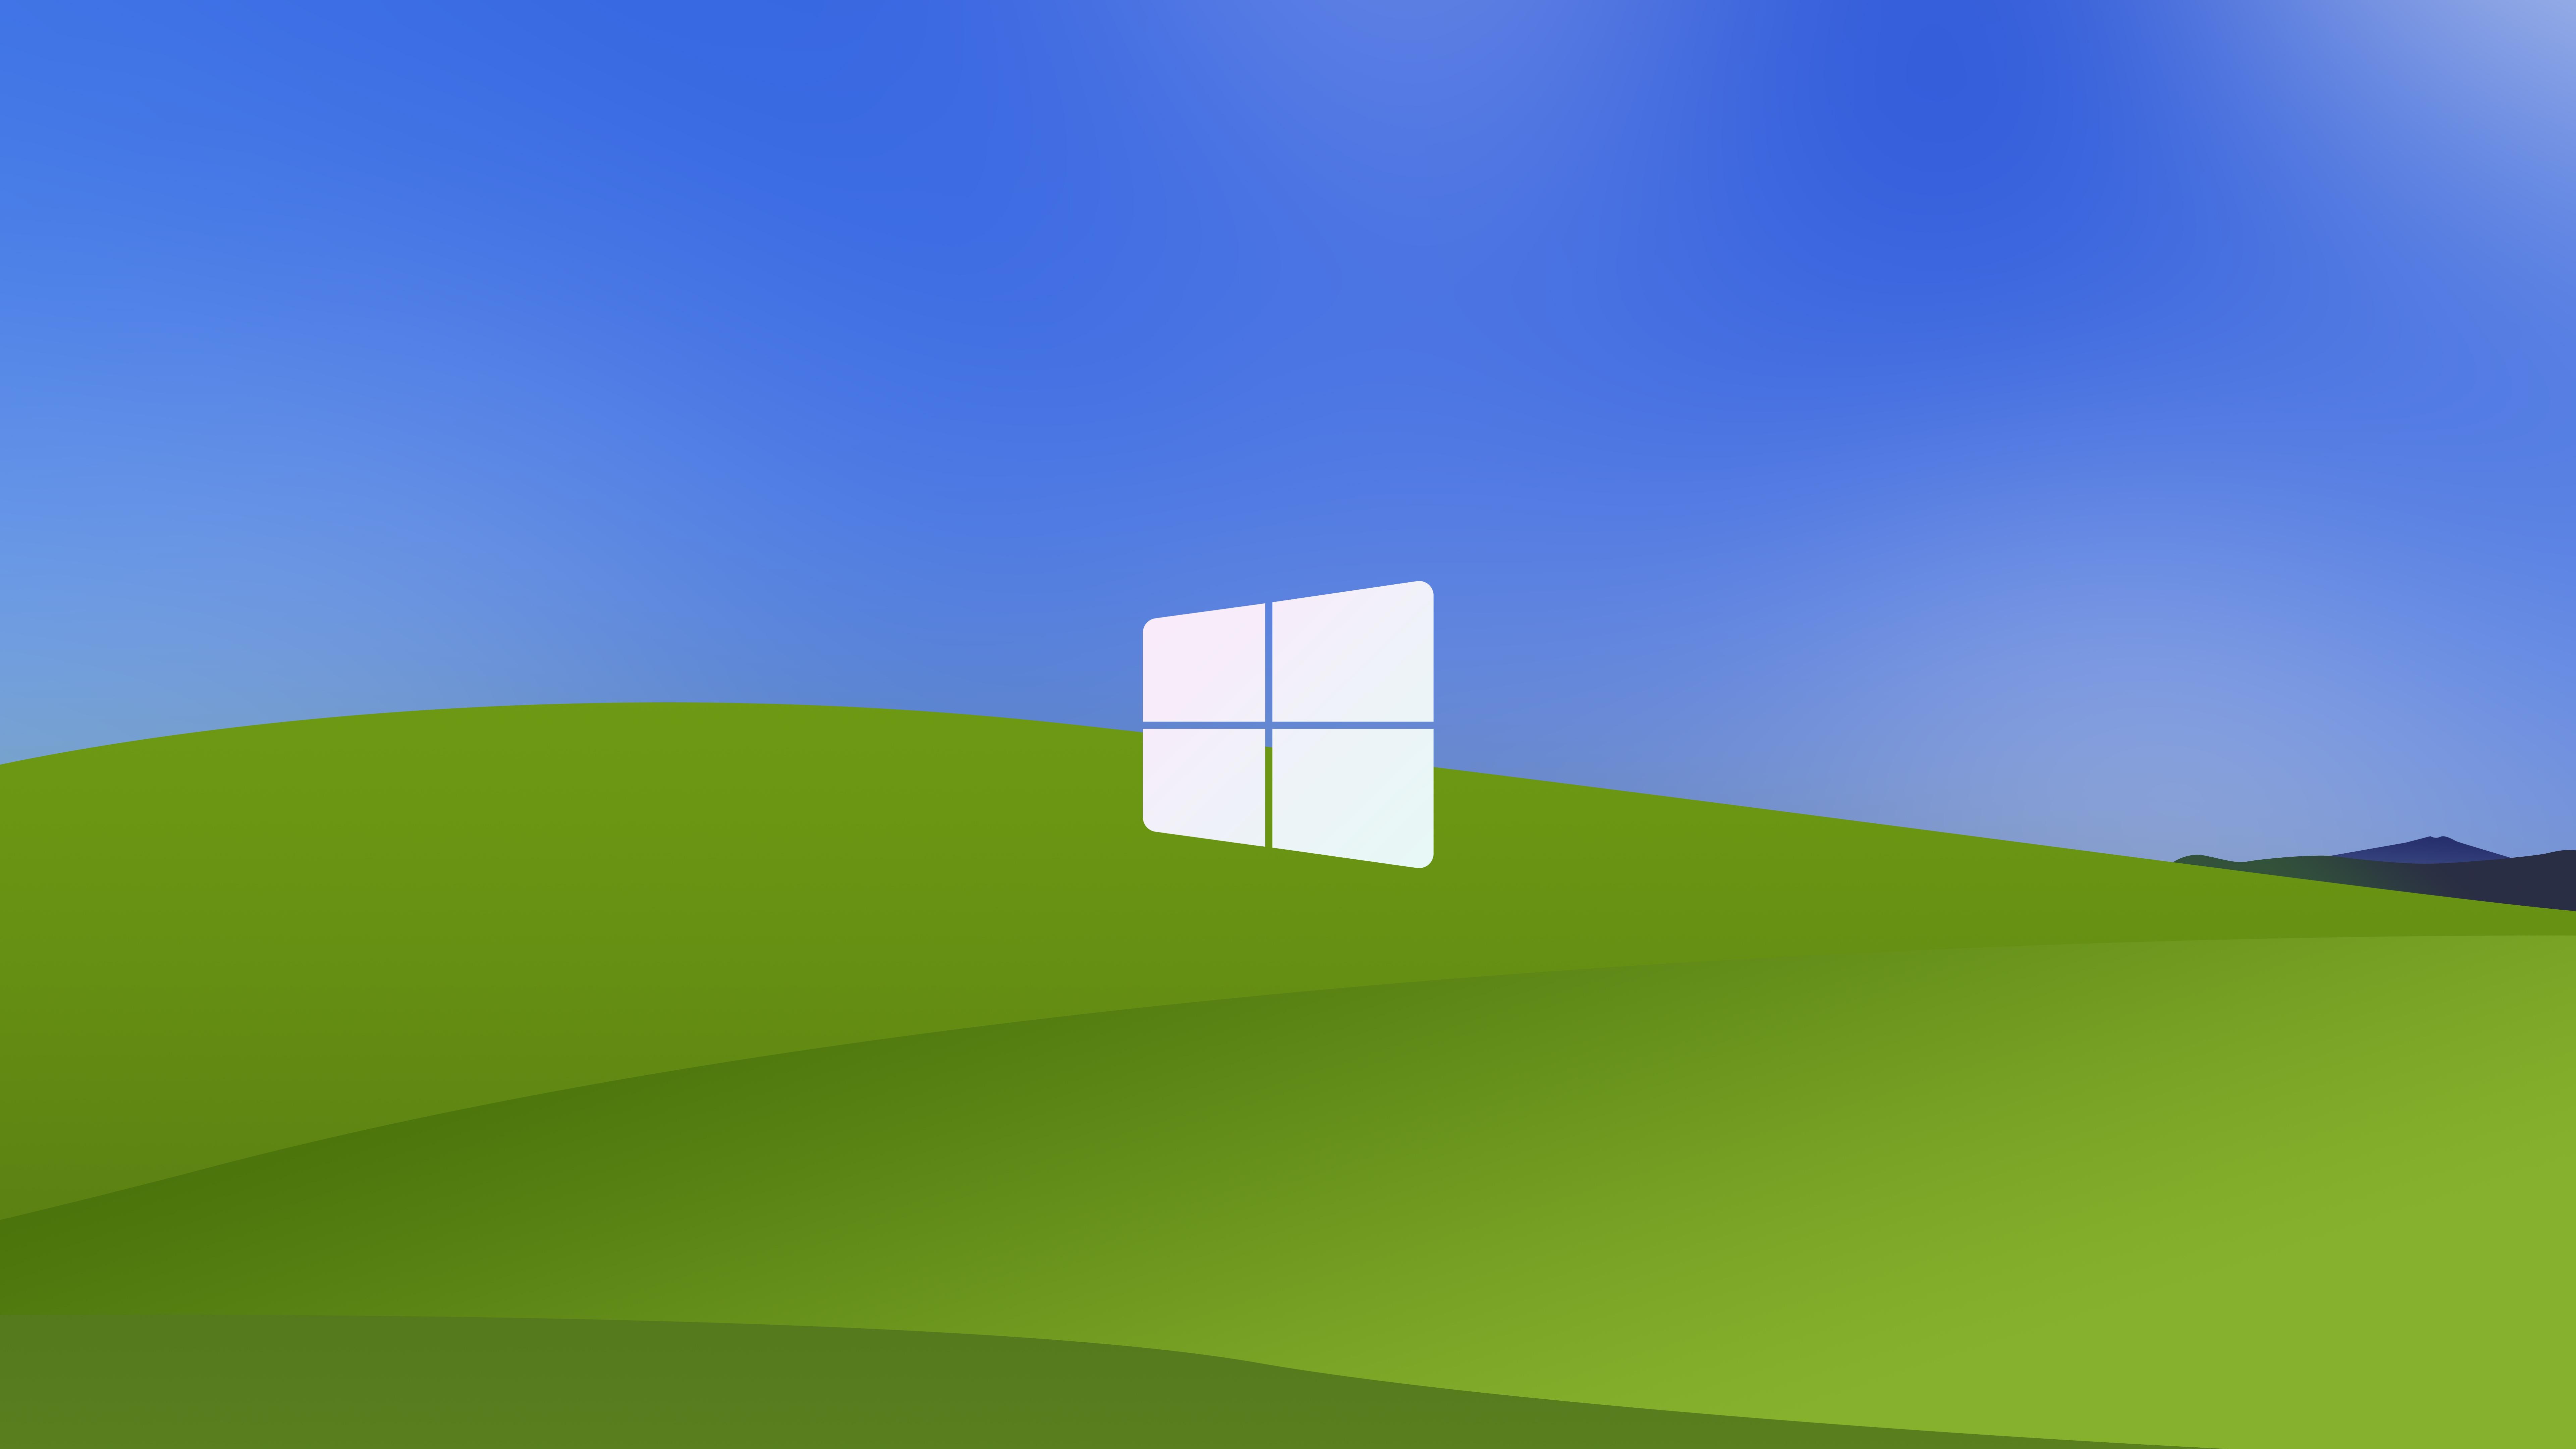 Windows xp logo minimalism k hd puter k wallpapers images backgrounds photos and pictures